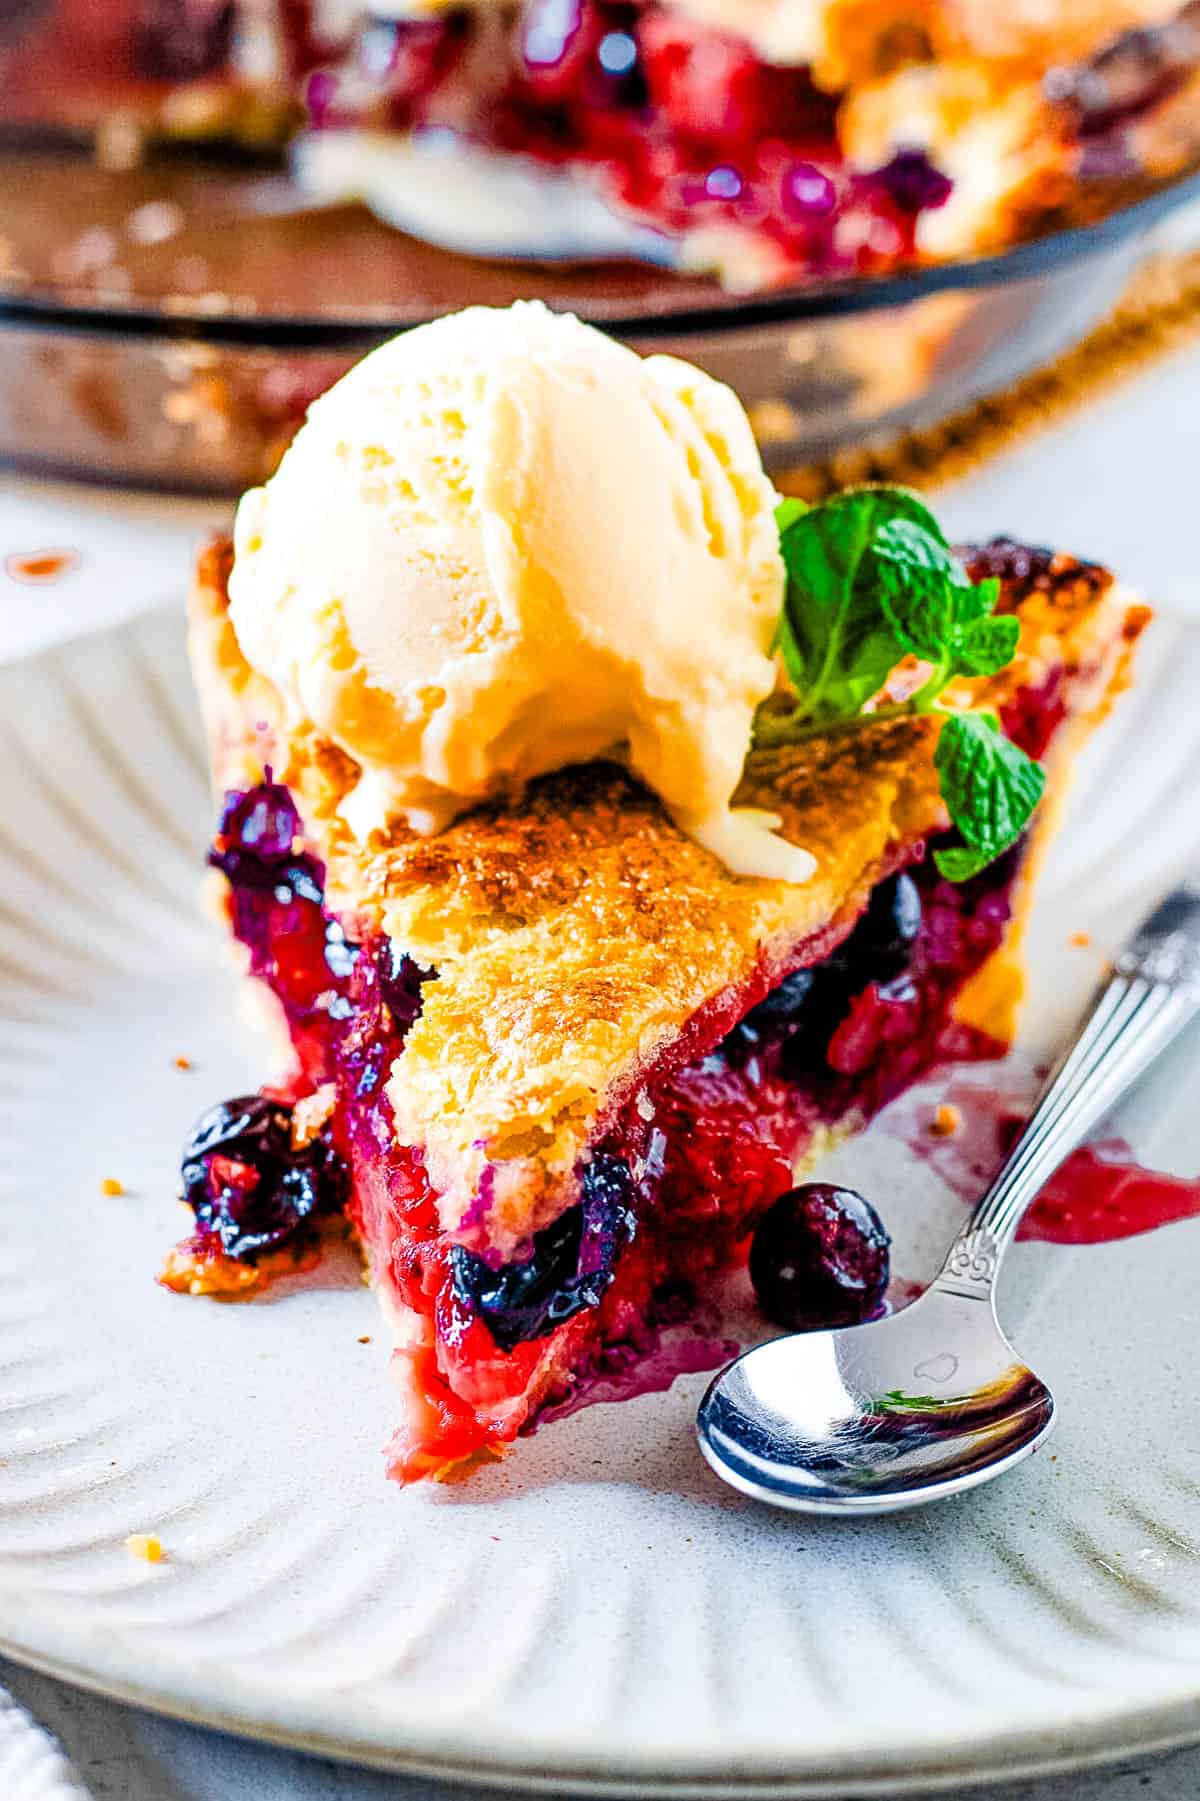 Slice of easy strawberry blueberry pie topped with ice cream with a whole pie in the background.